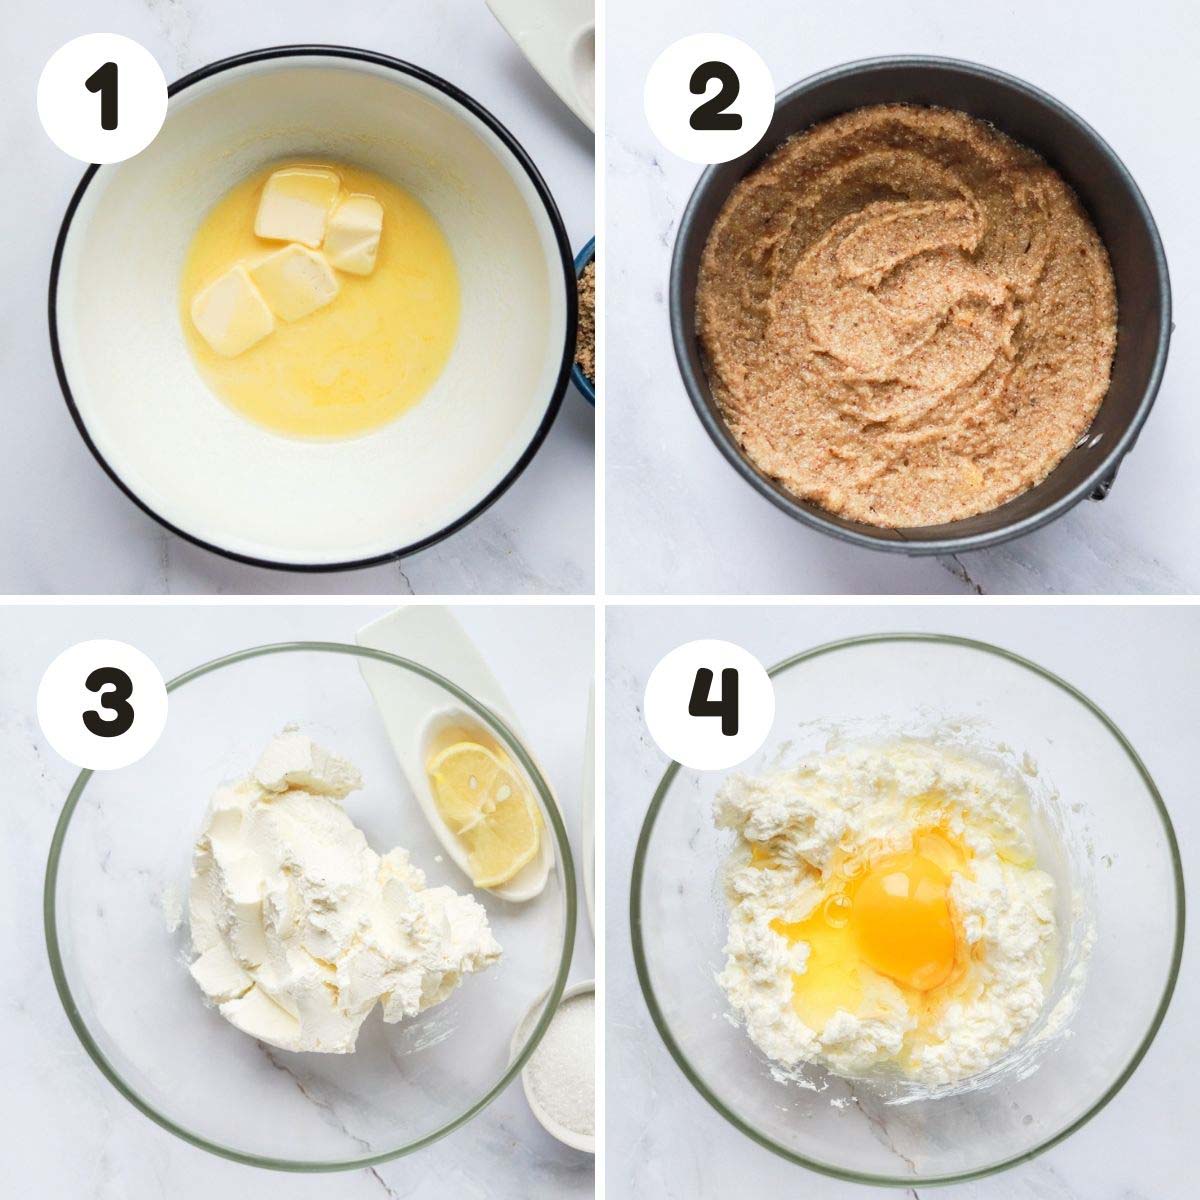 Steps to make the cheesecake.